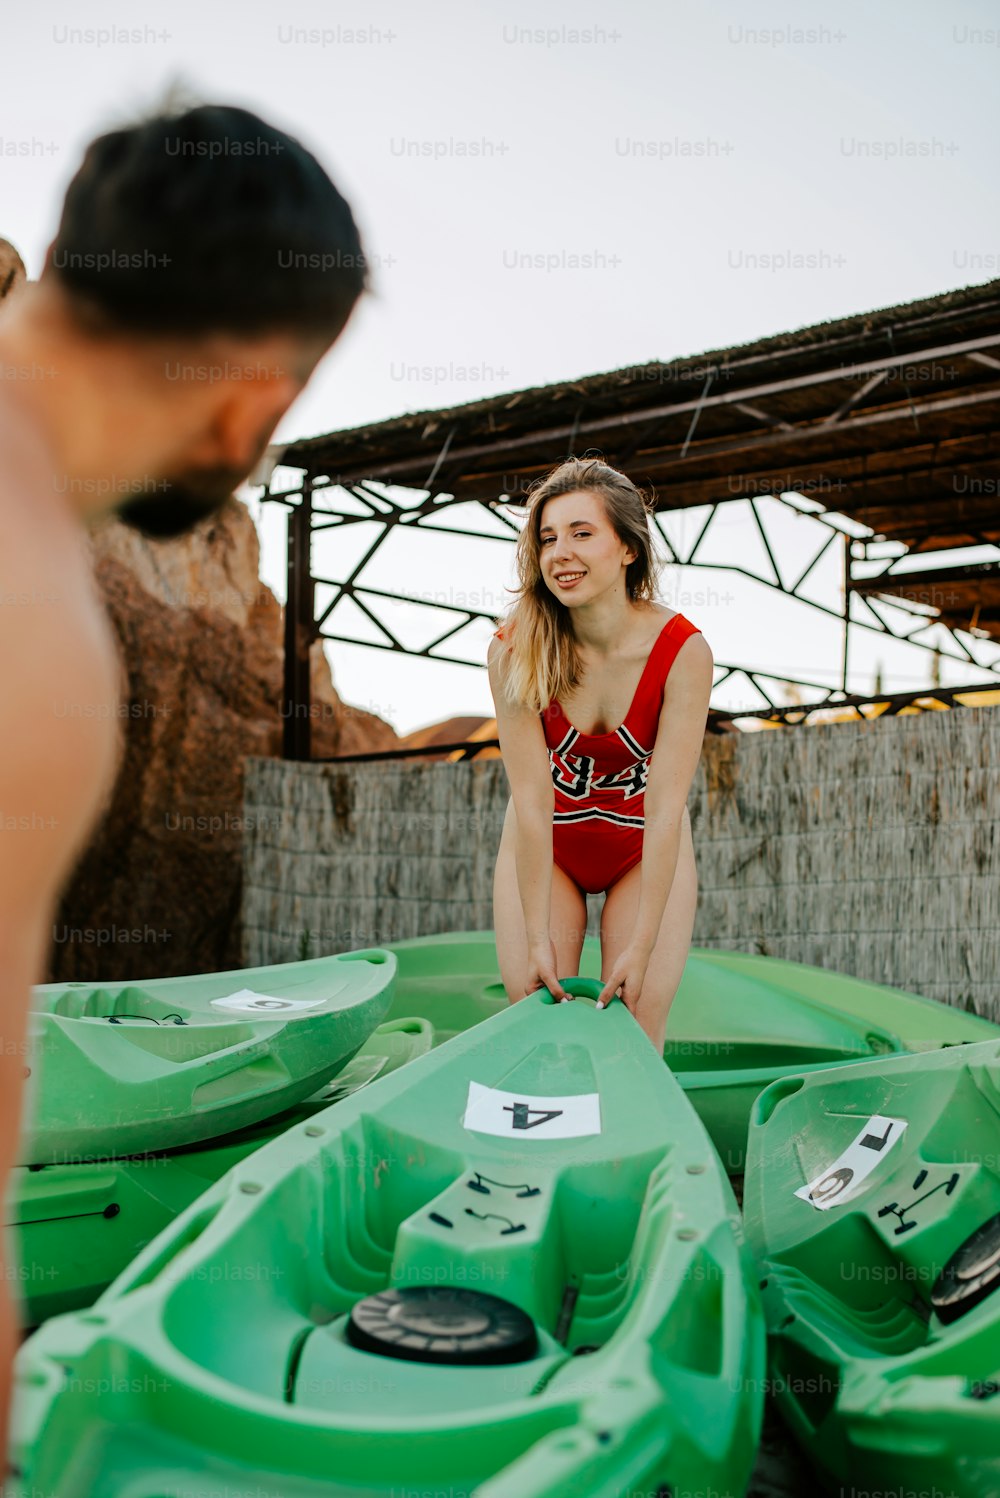 a woman in a bathing suit sitting on a green boat